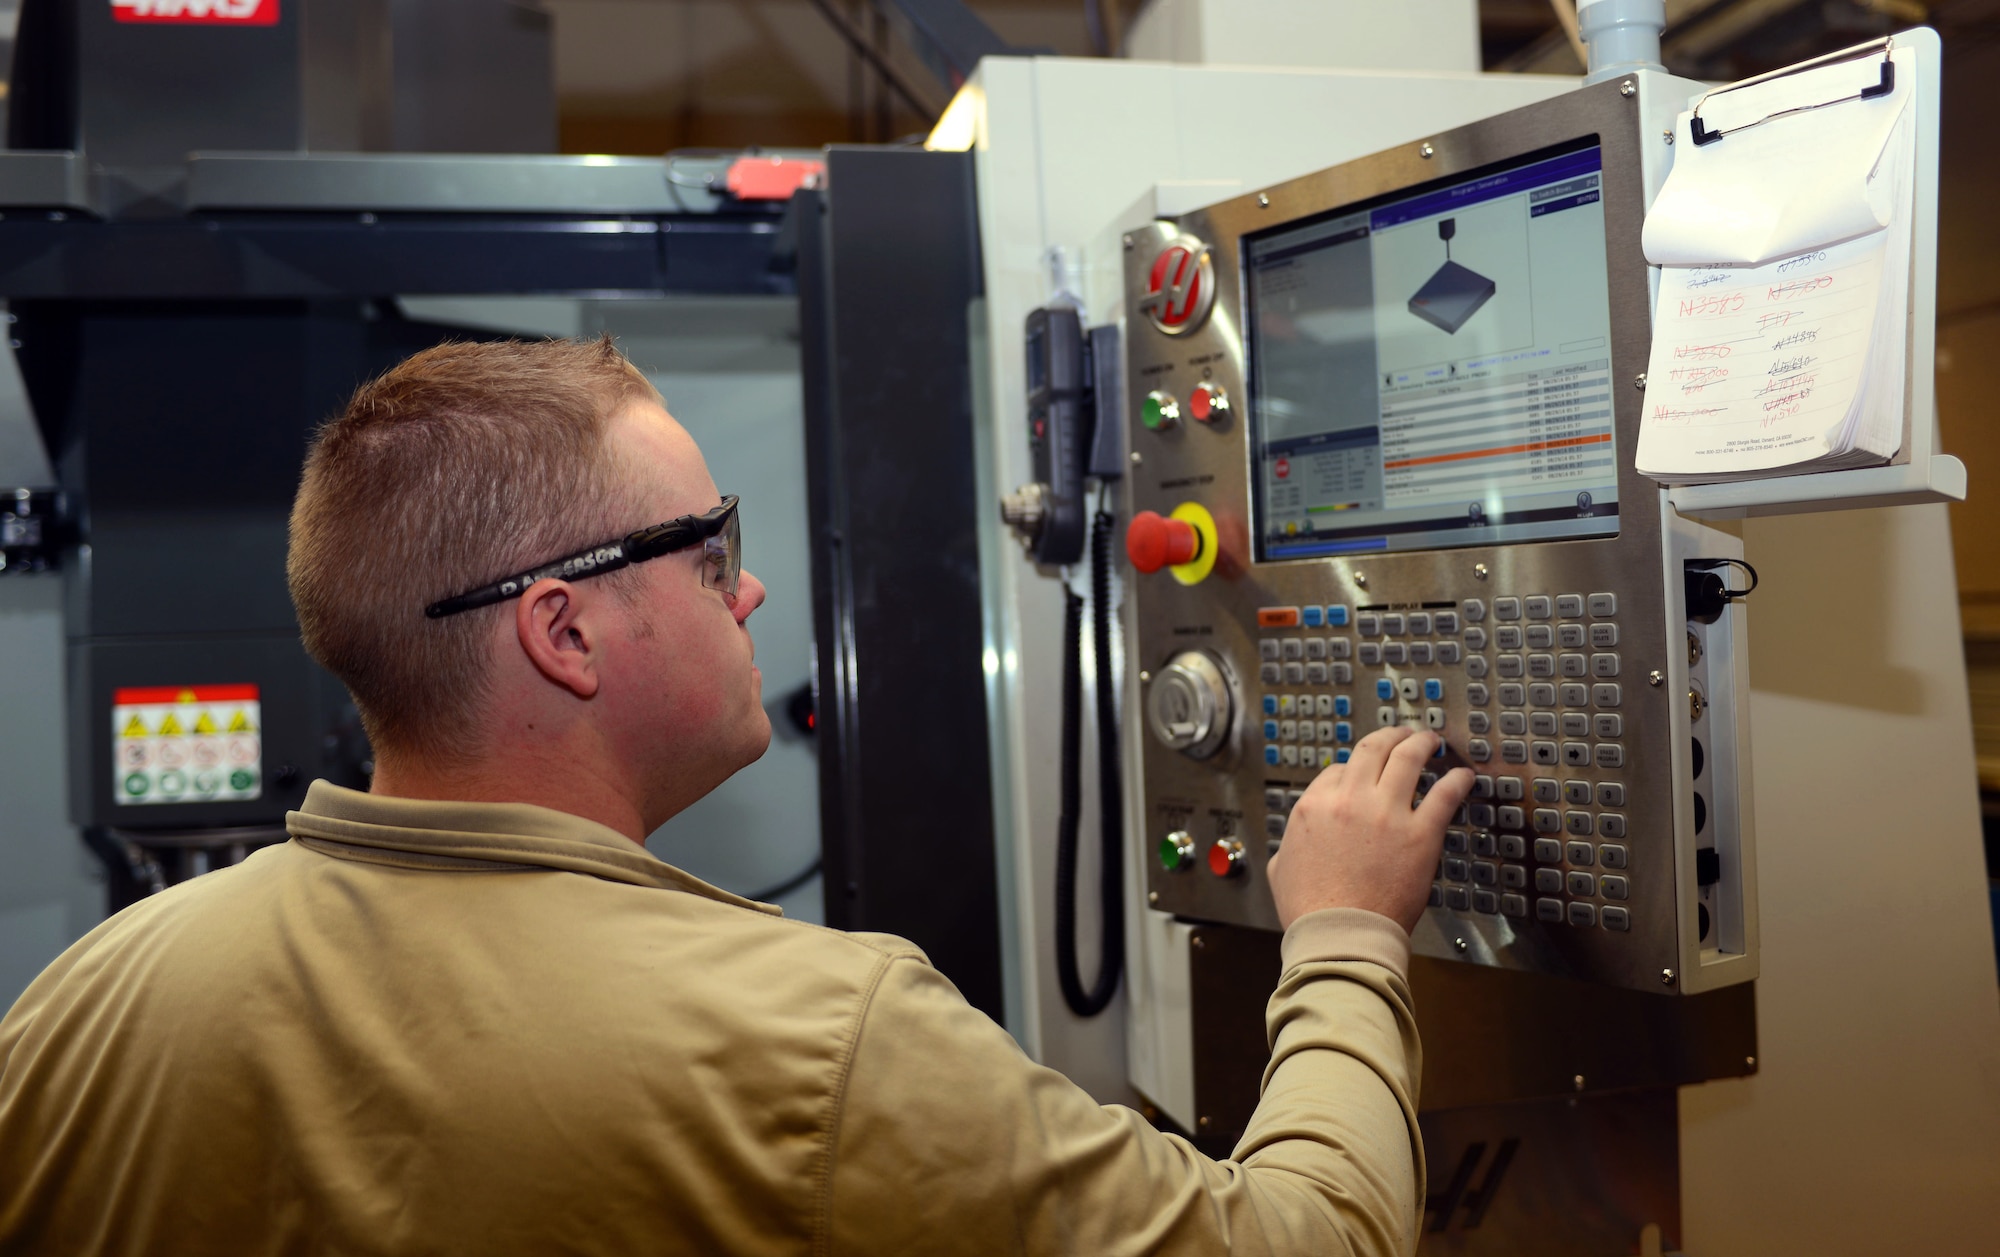 Senior Airman Drake Anderson, an aircraft metals technology journeyman assigned to the 28th Maintenance Squadron, inputs instructions into a VF5 Super Speed at Ellsworth Air Force Base, S.D., Feb. 22, 2017. The Super-Speed Vertical Machining Center, or the VF-5SS, allows the shop to speed up the manufacturing process and run more efficiently, as well as provides a way to test the tolerance of new aircraft parts. (U.S. Air Force photo by Airman 1st Class Donald C. Knechtel)